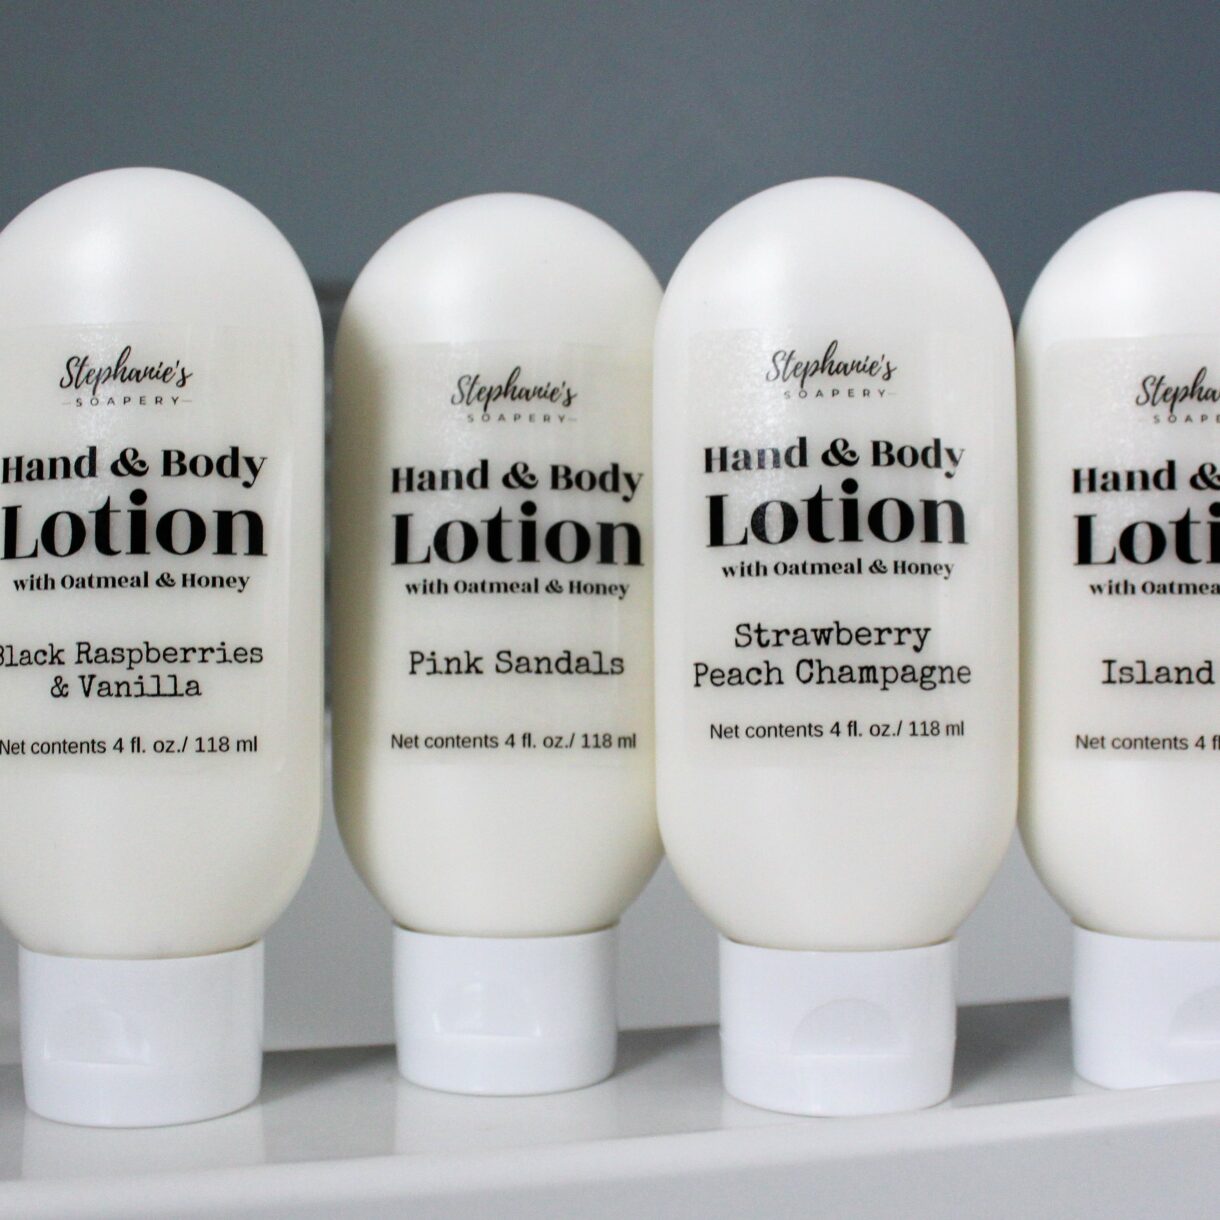 Hand & Body Lotion with Oatmeal & Honey